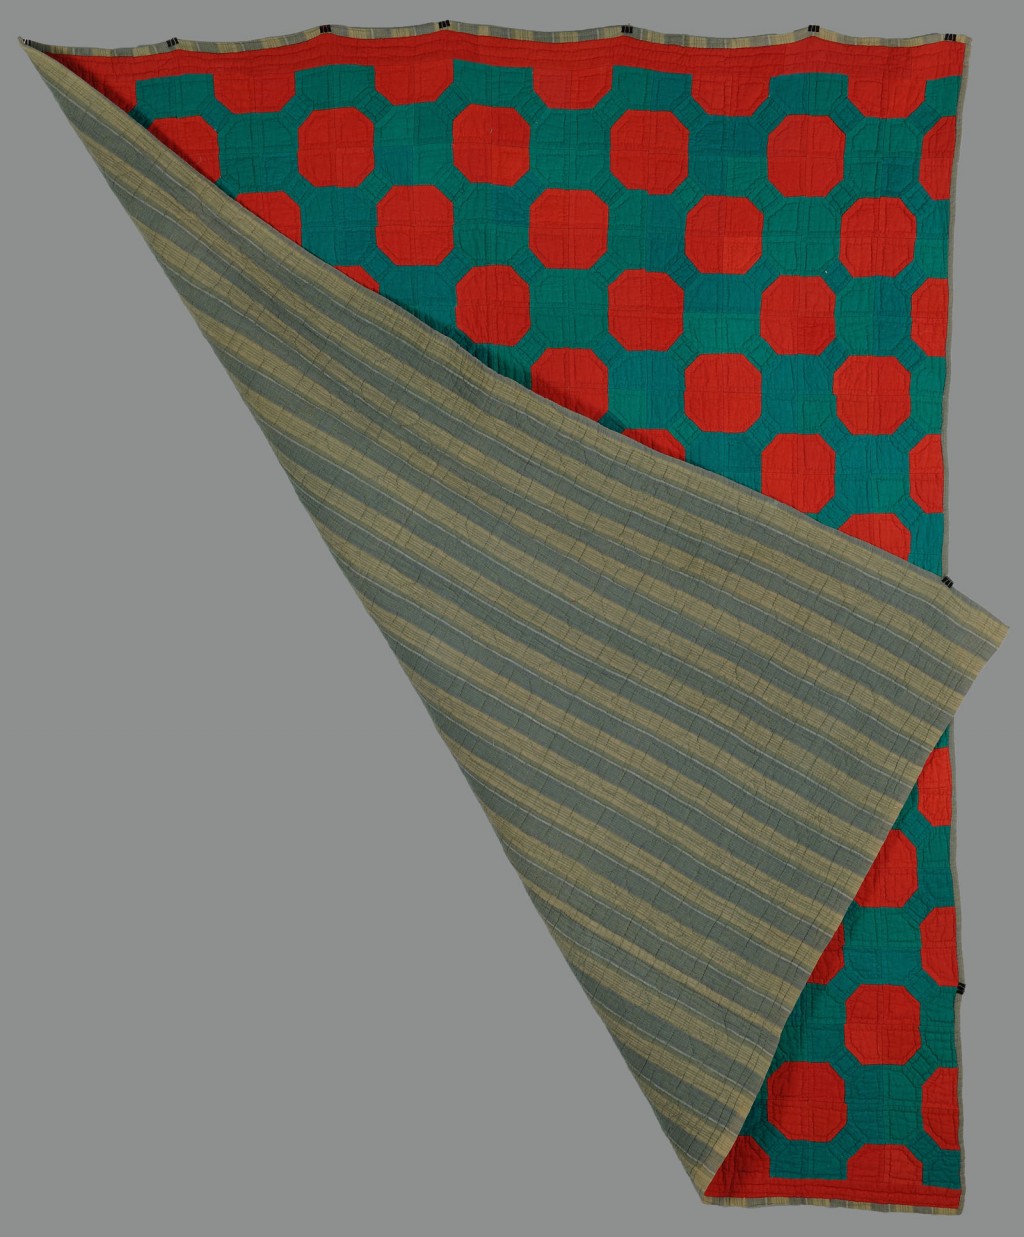 Lot 648: Pennsylvania red and green quilt